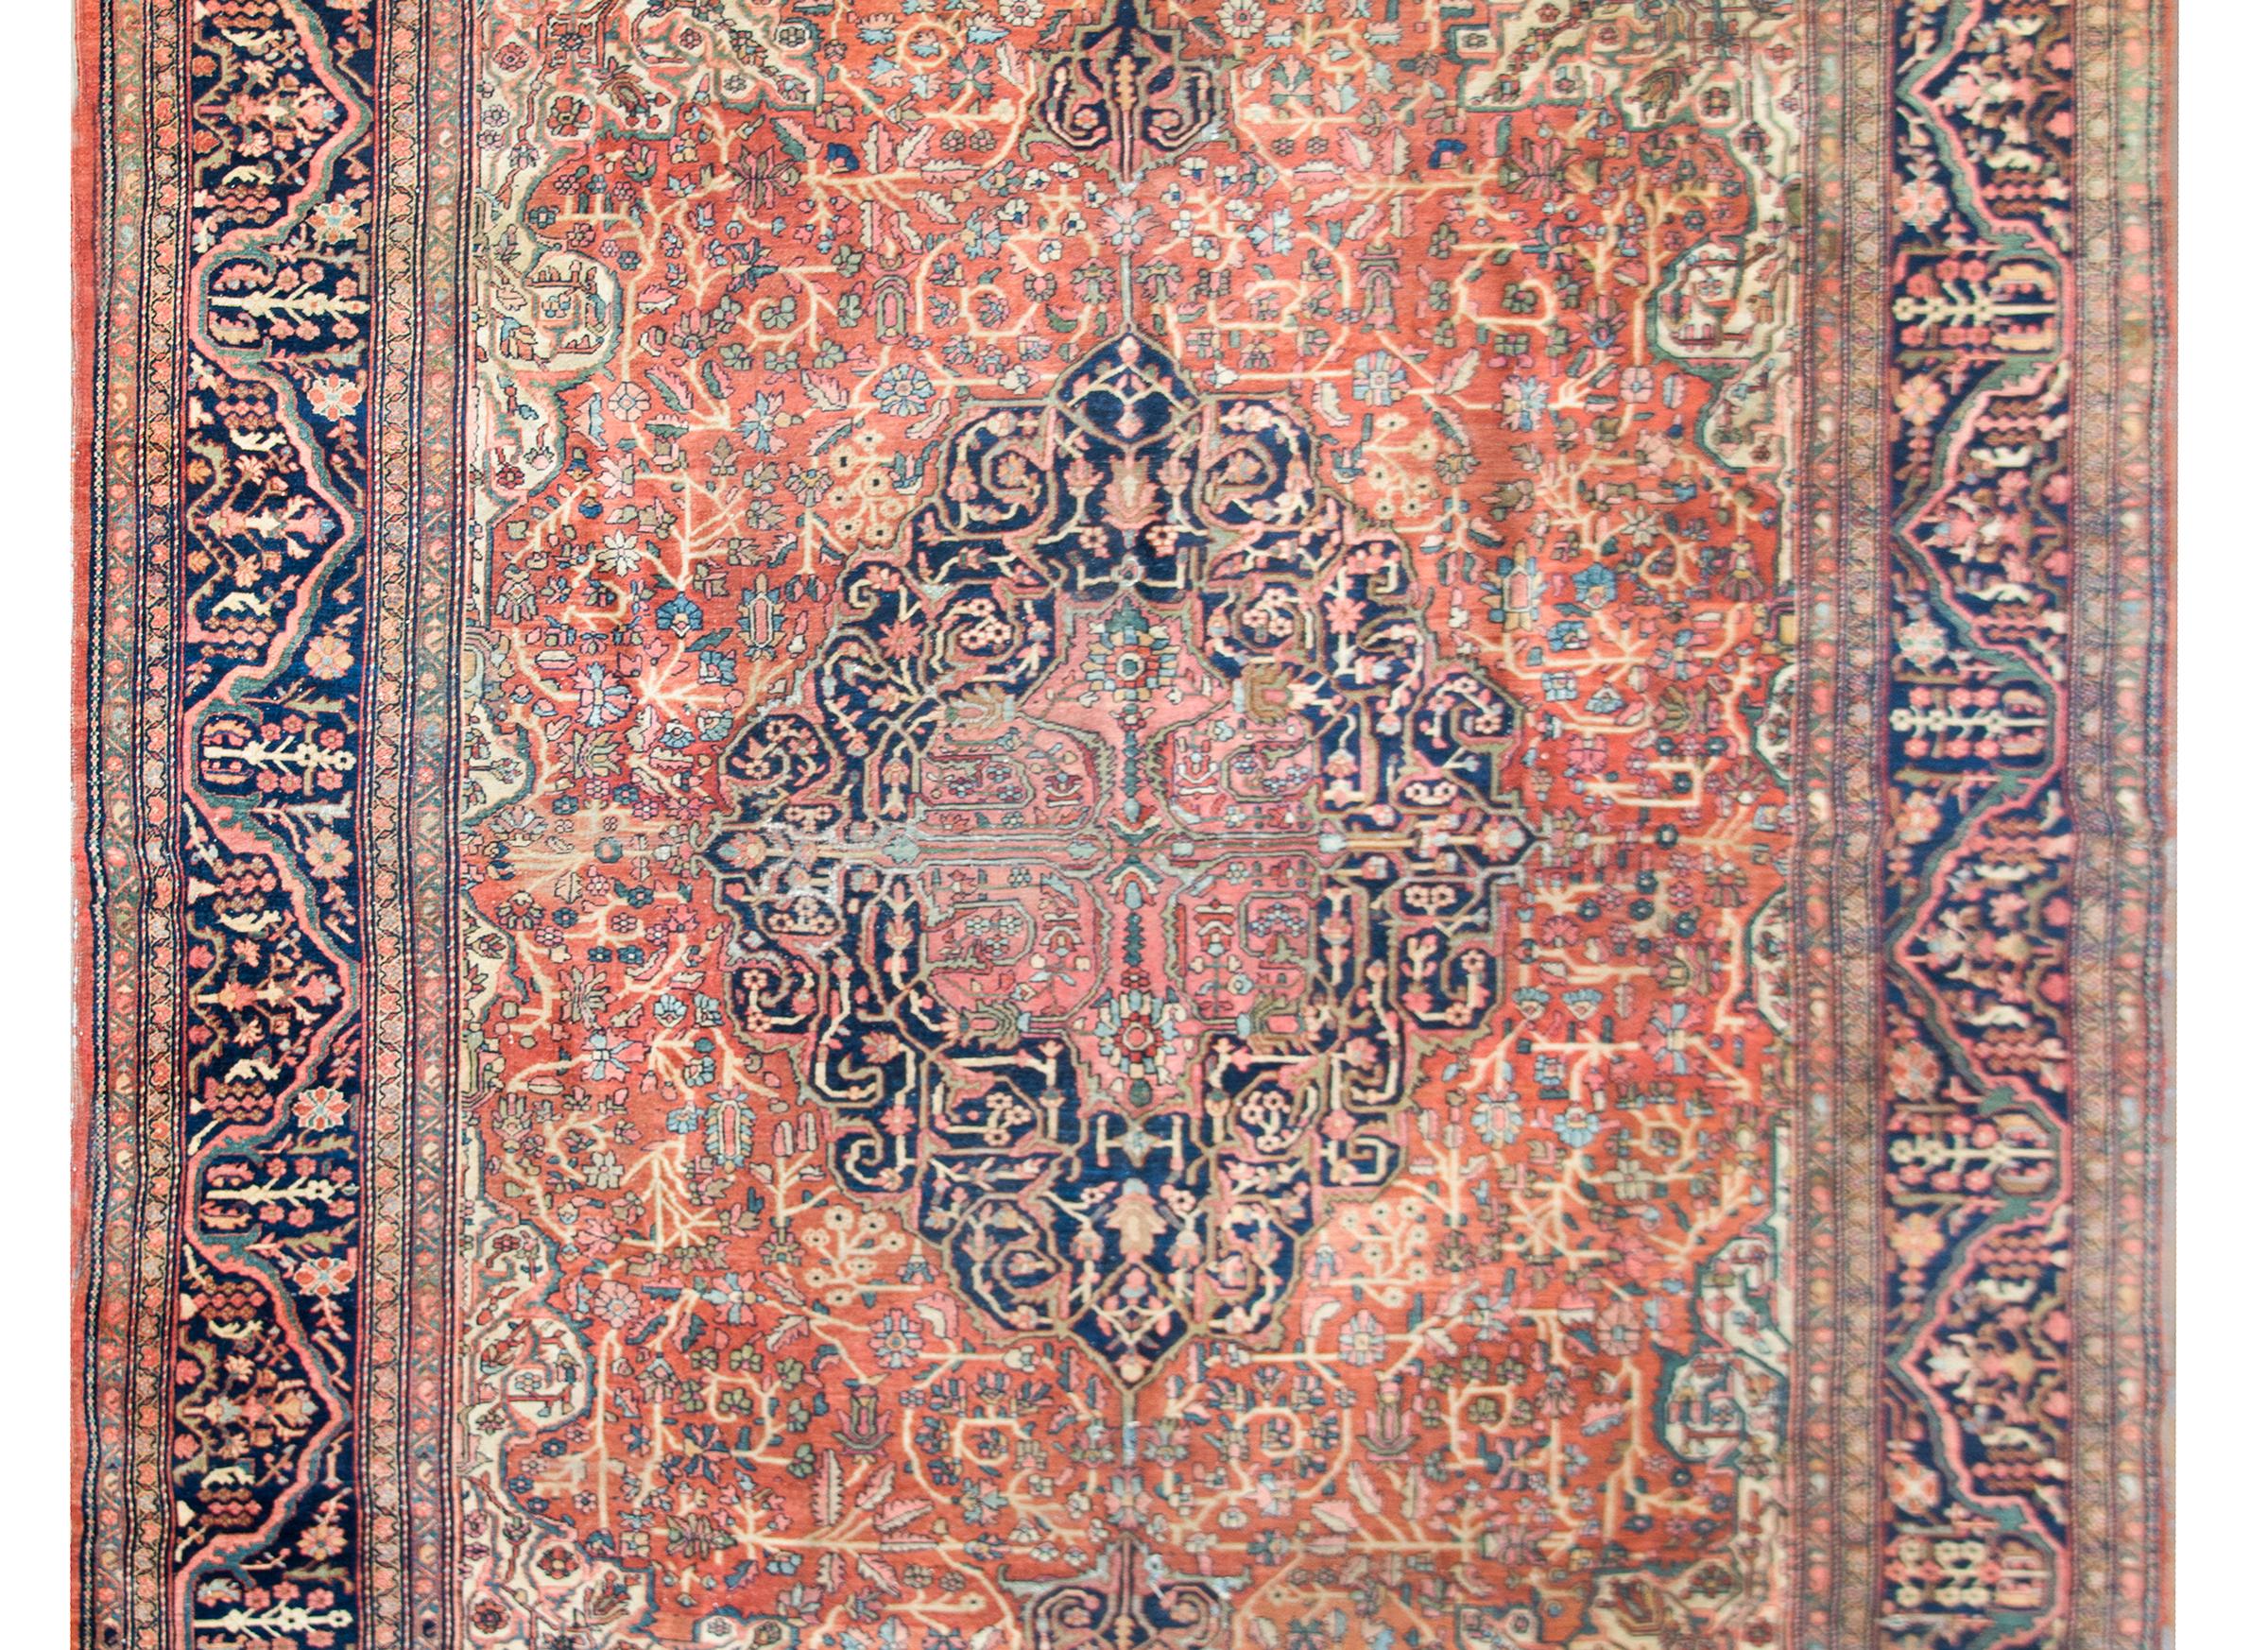 An incredible early 20th century Persian Sarouk rug with the most elaborate central medallion with densely woven scrolling vine and floral pattern woven in myriad colors including coral, light and dark indigo, green and cream, and all set against a